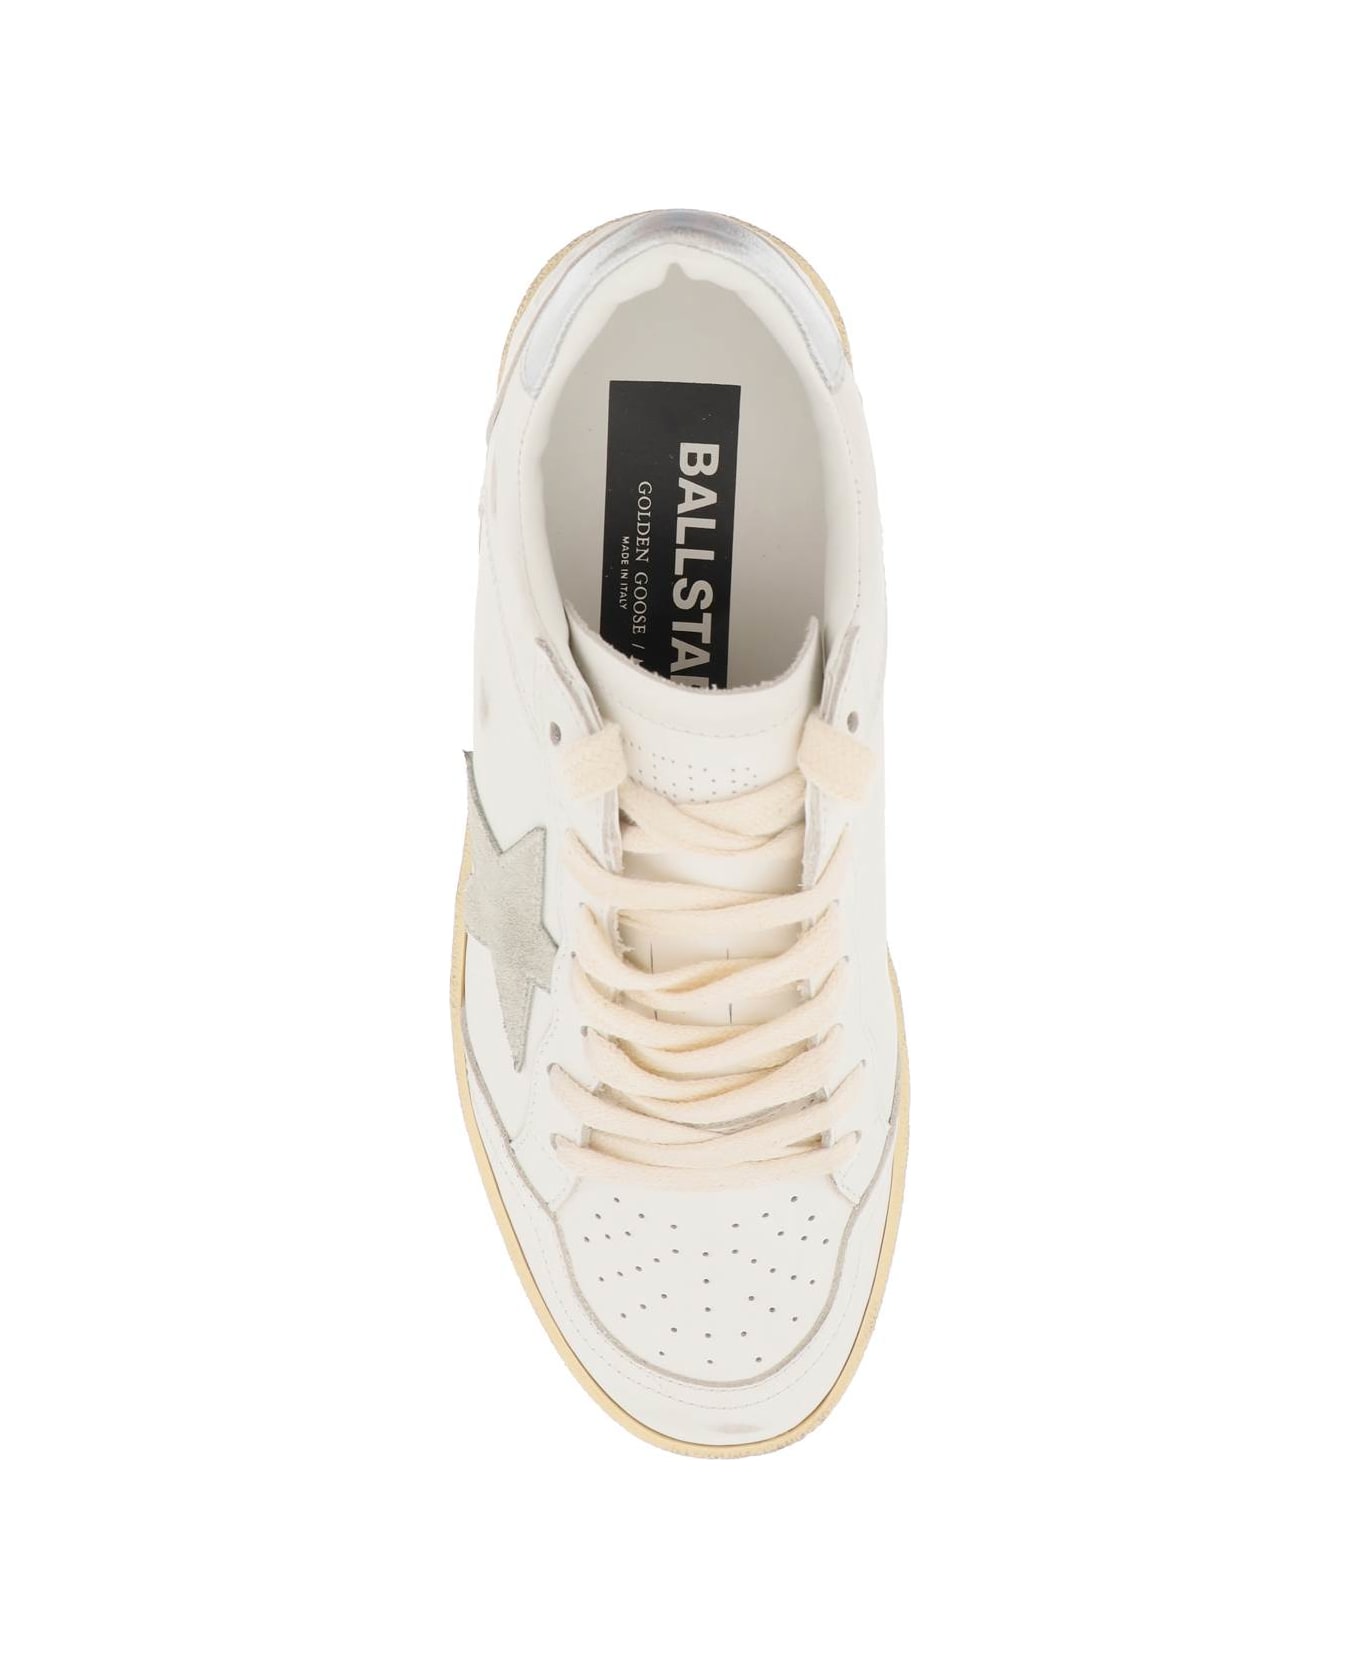 Golden Goose Leather Ball Star Sneakers - WHITE ICE SILVER (White)